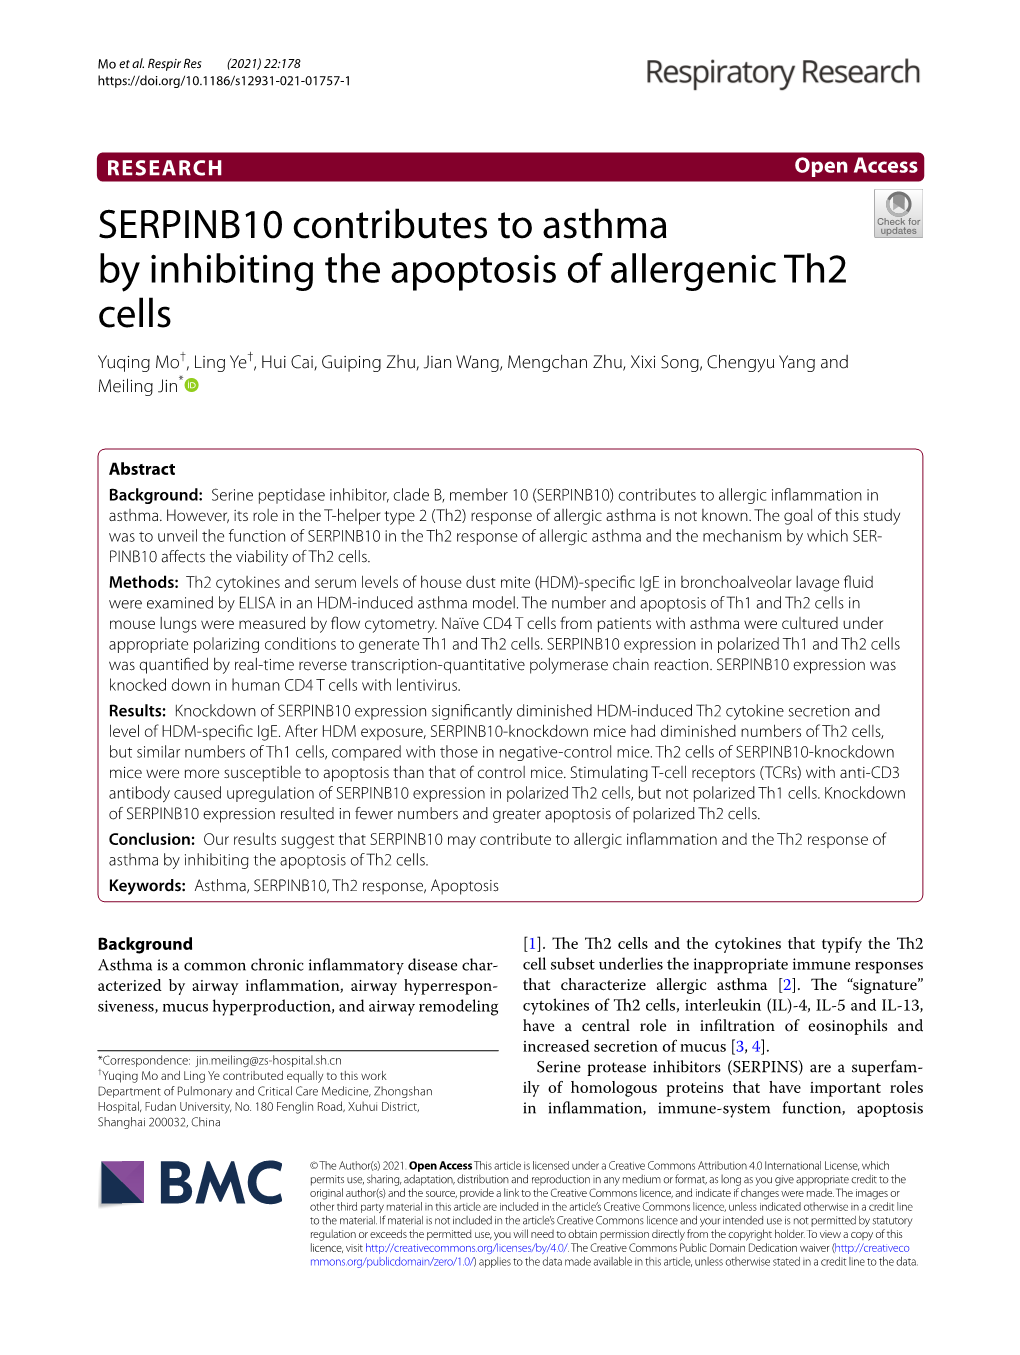 SERPINB10 Contributes to Asthma by Inhibiting the Apoptosis of Allergenic Th2 Cells